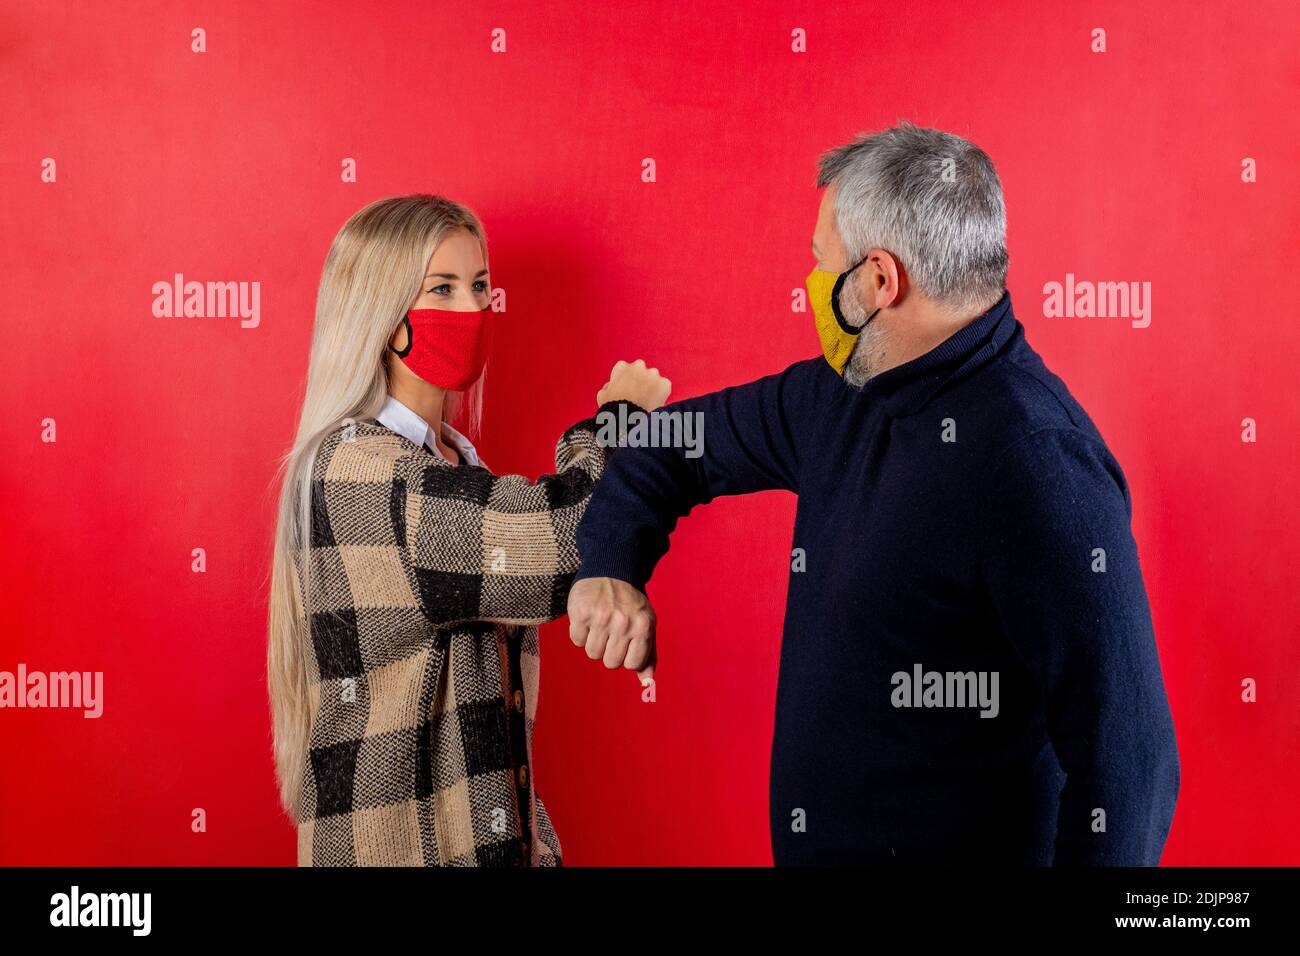 Girl and man greeting each other with the arms. Couple of people greetings with elbows on red background. People wearing face mask. Social distancing Stock Photo